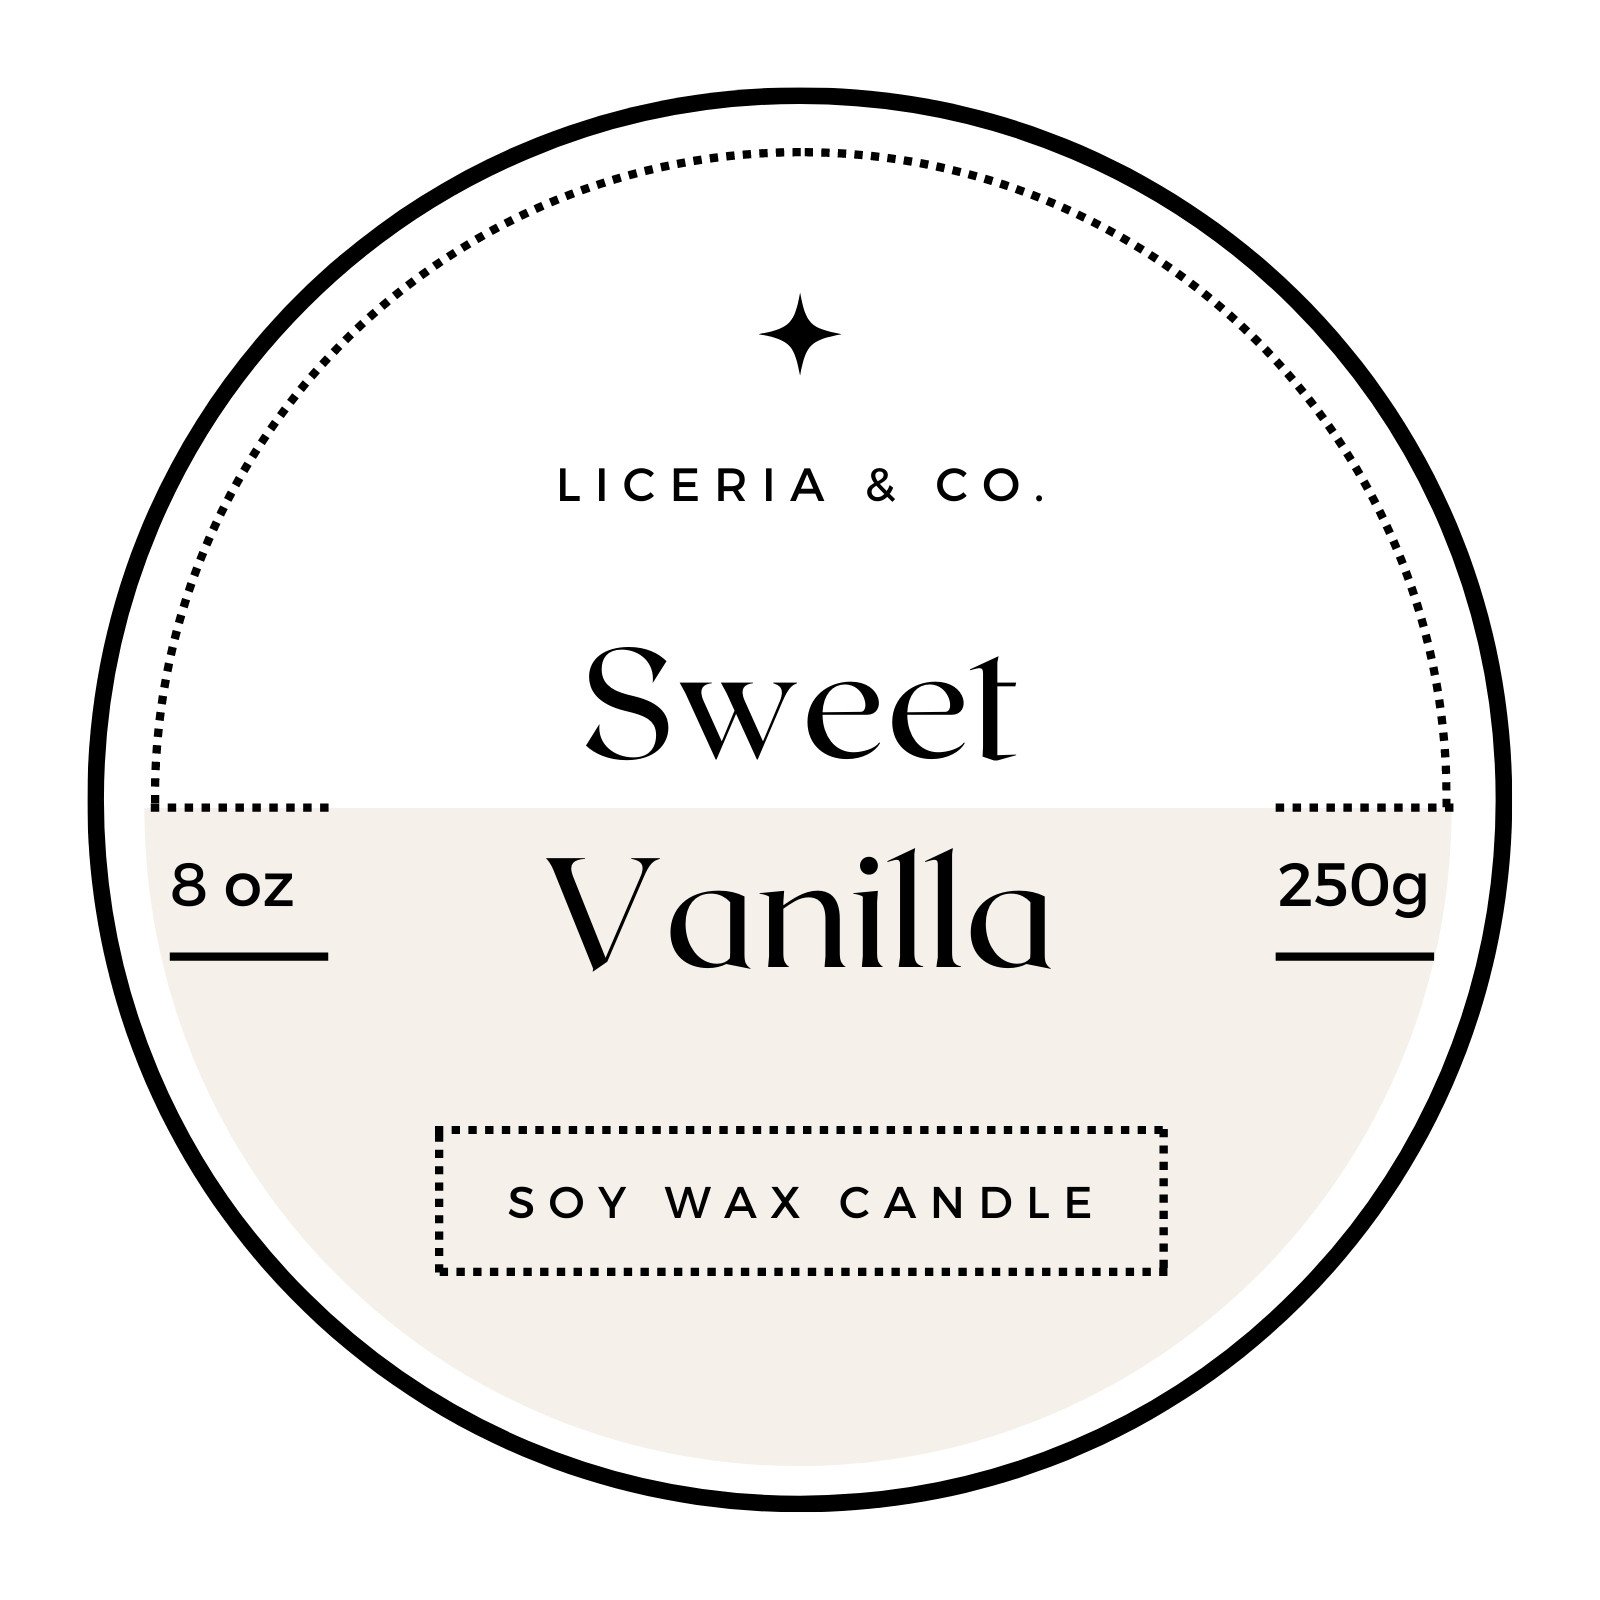 Candle Labels: Our Material and Decoration Capabilities